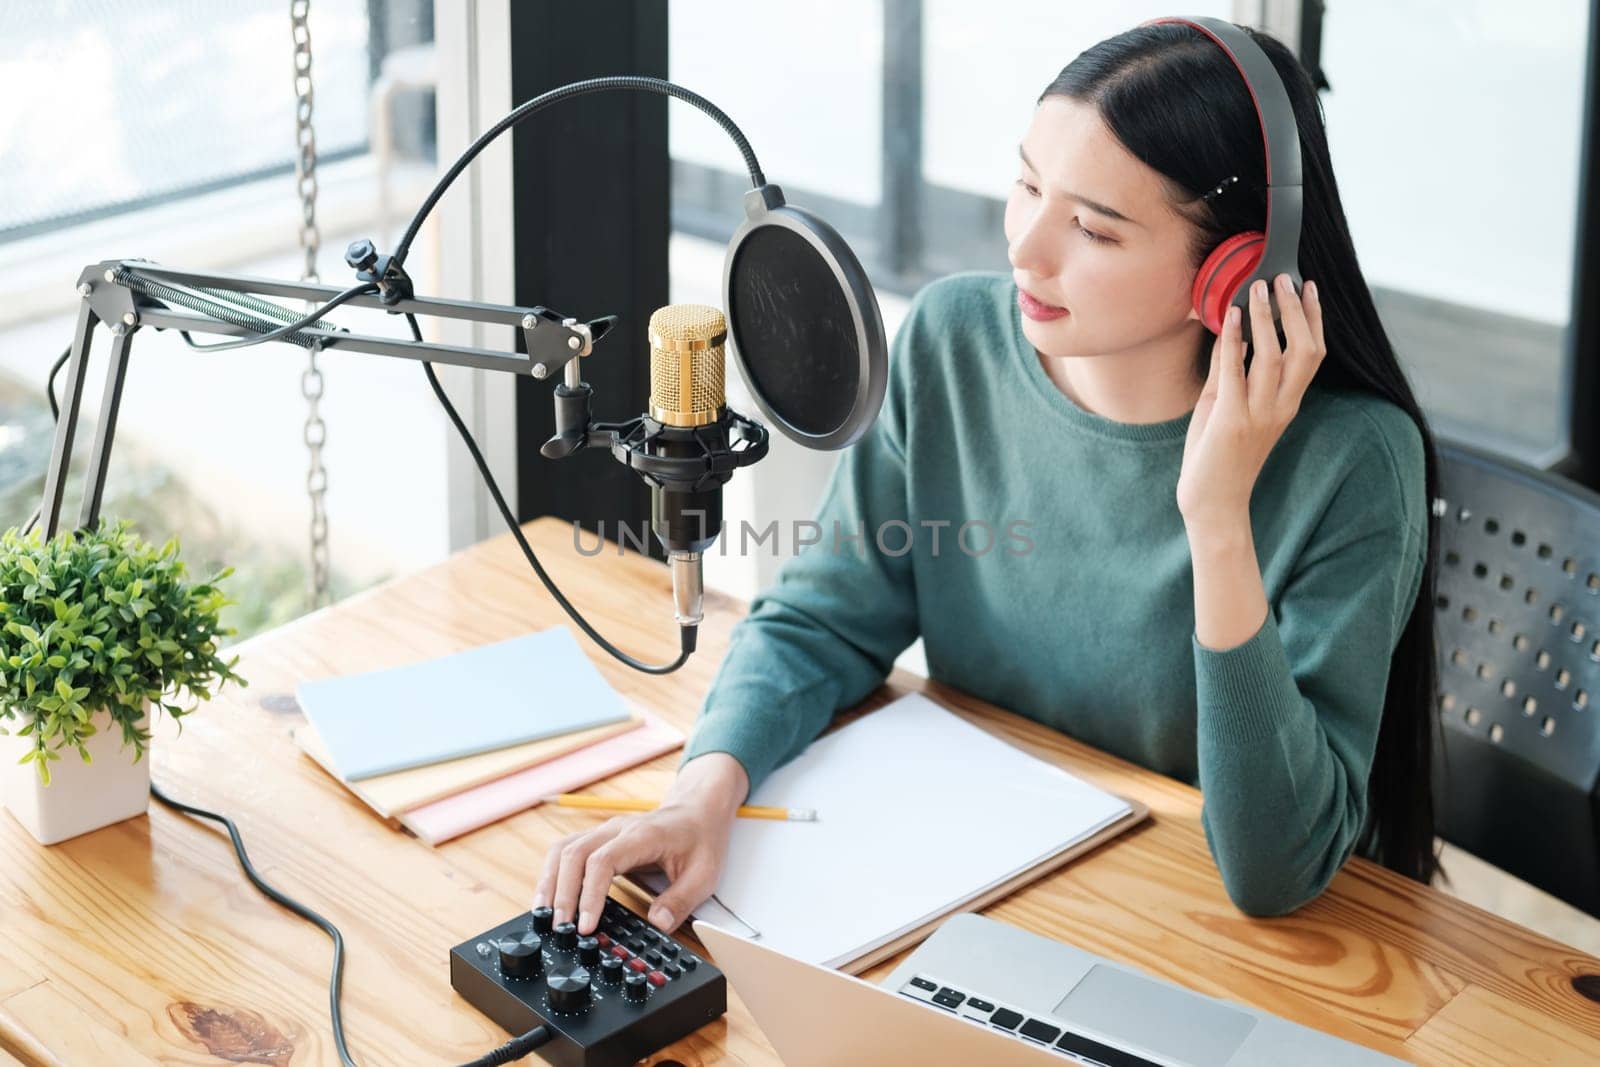 A woman is sitting at a desk with a microphone and a laptop. She is wearing headphones and she is recording a podcast or a voiceover